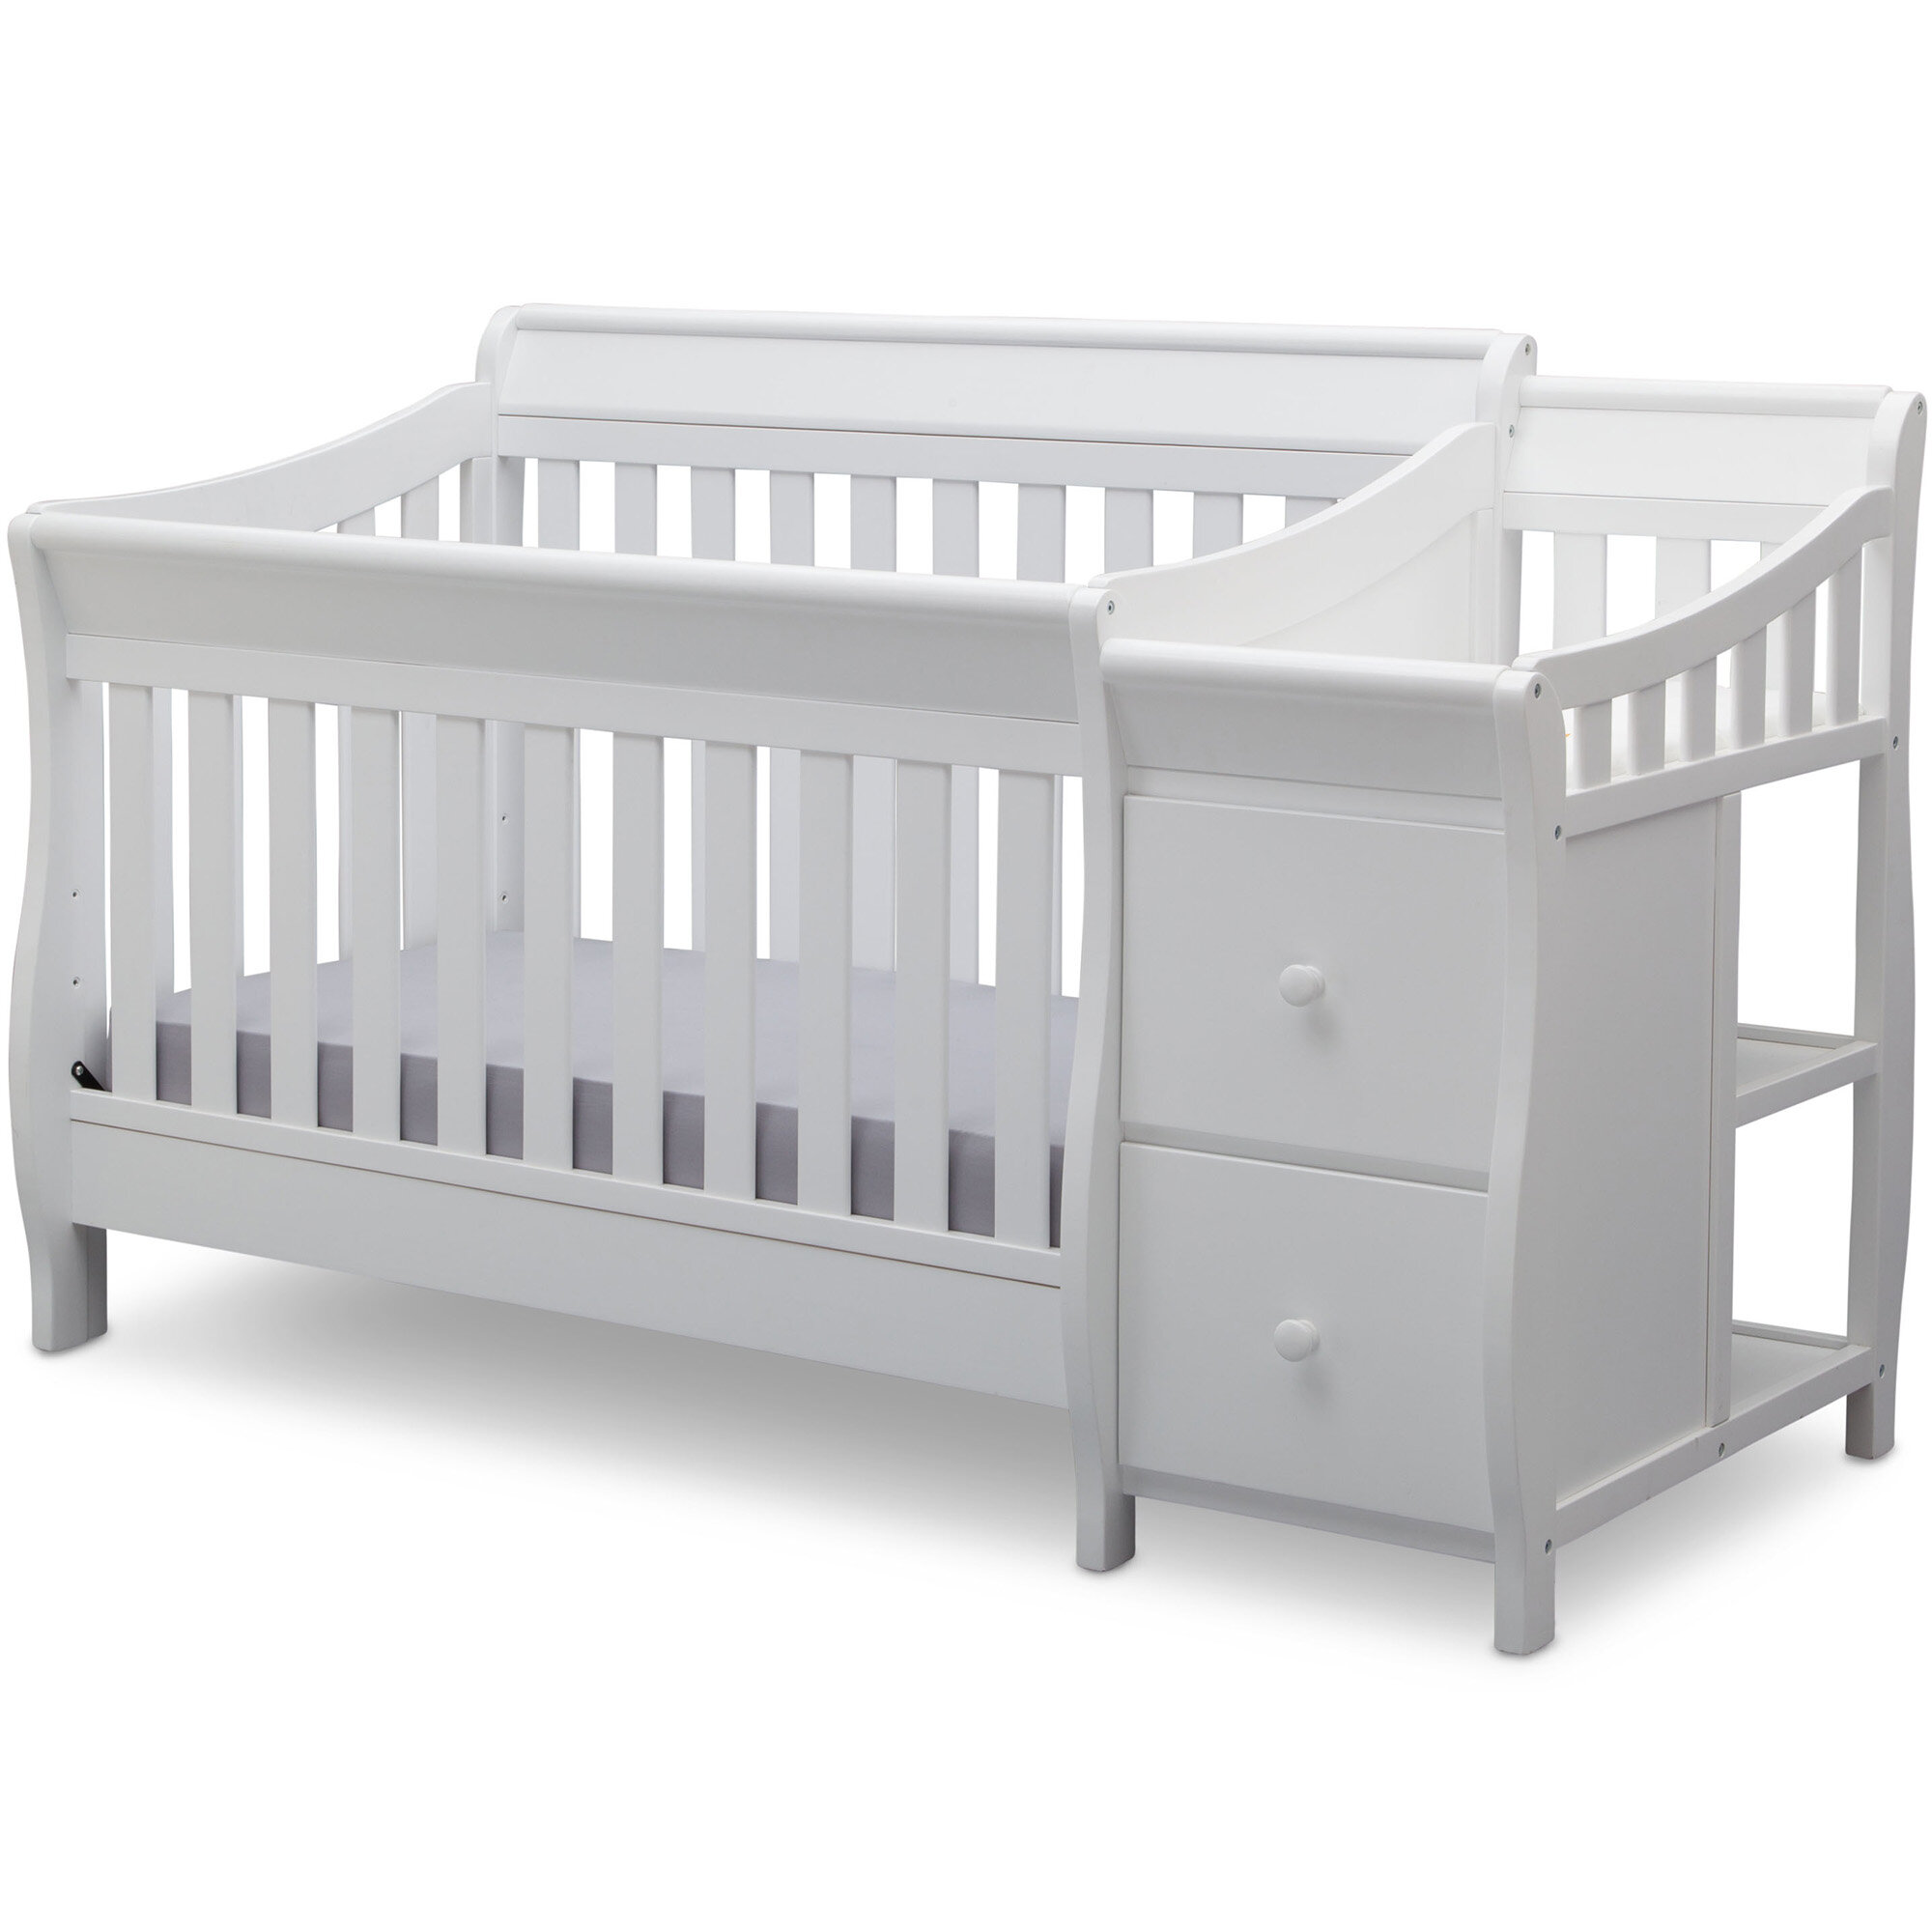 4 in one baby crib